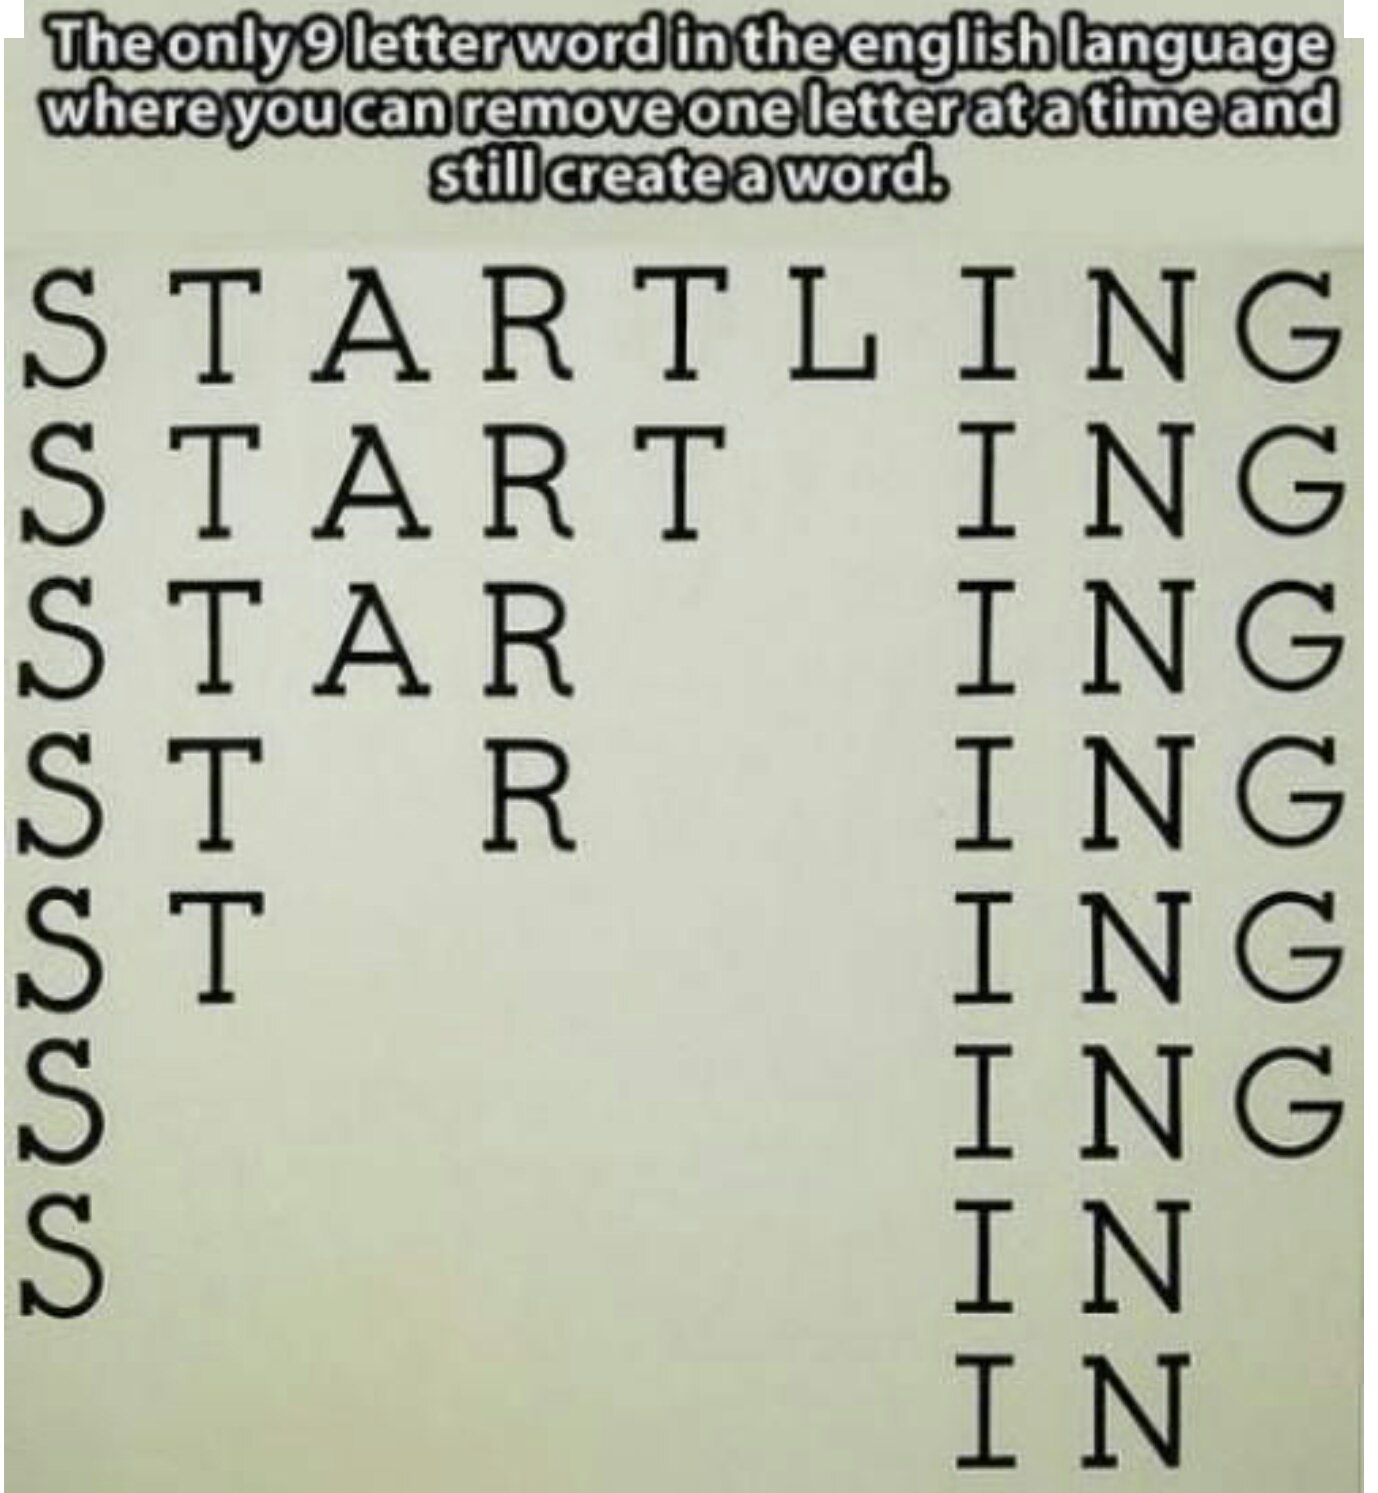 memes about the things they carried - The only 9 letter word in the english language where you can remove one letter at a time and still create a word. Rtling Sta Ing Eeeee Hhhhhhh Zzzzzz Uuuuu Zey